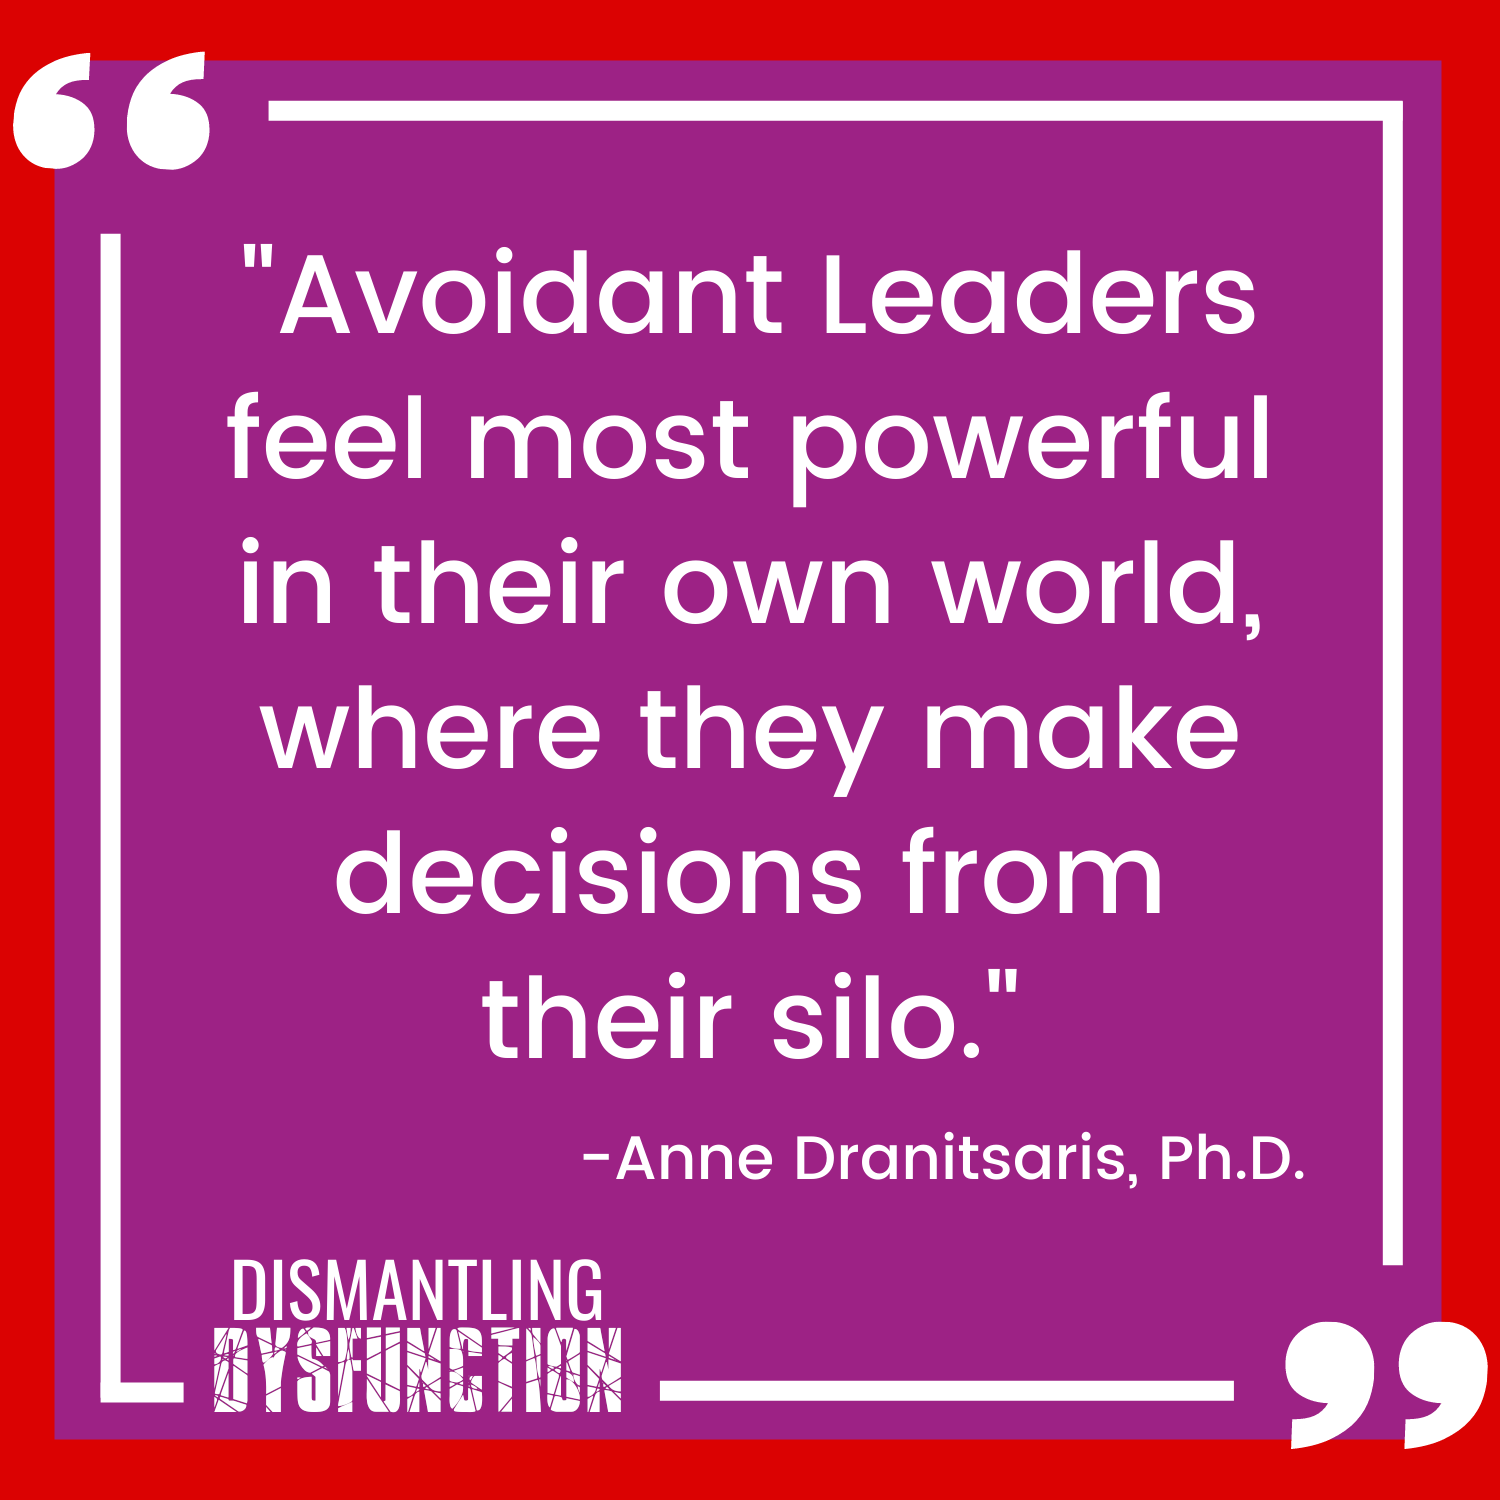 Directive leadership behavior that has no emotional charge to it is not autocratic - Anne Dranitsaris quote